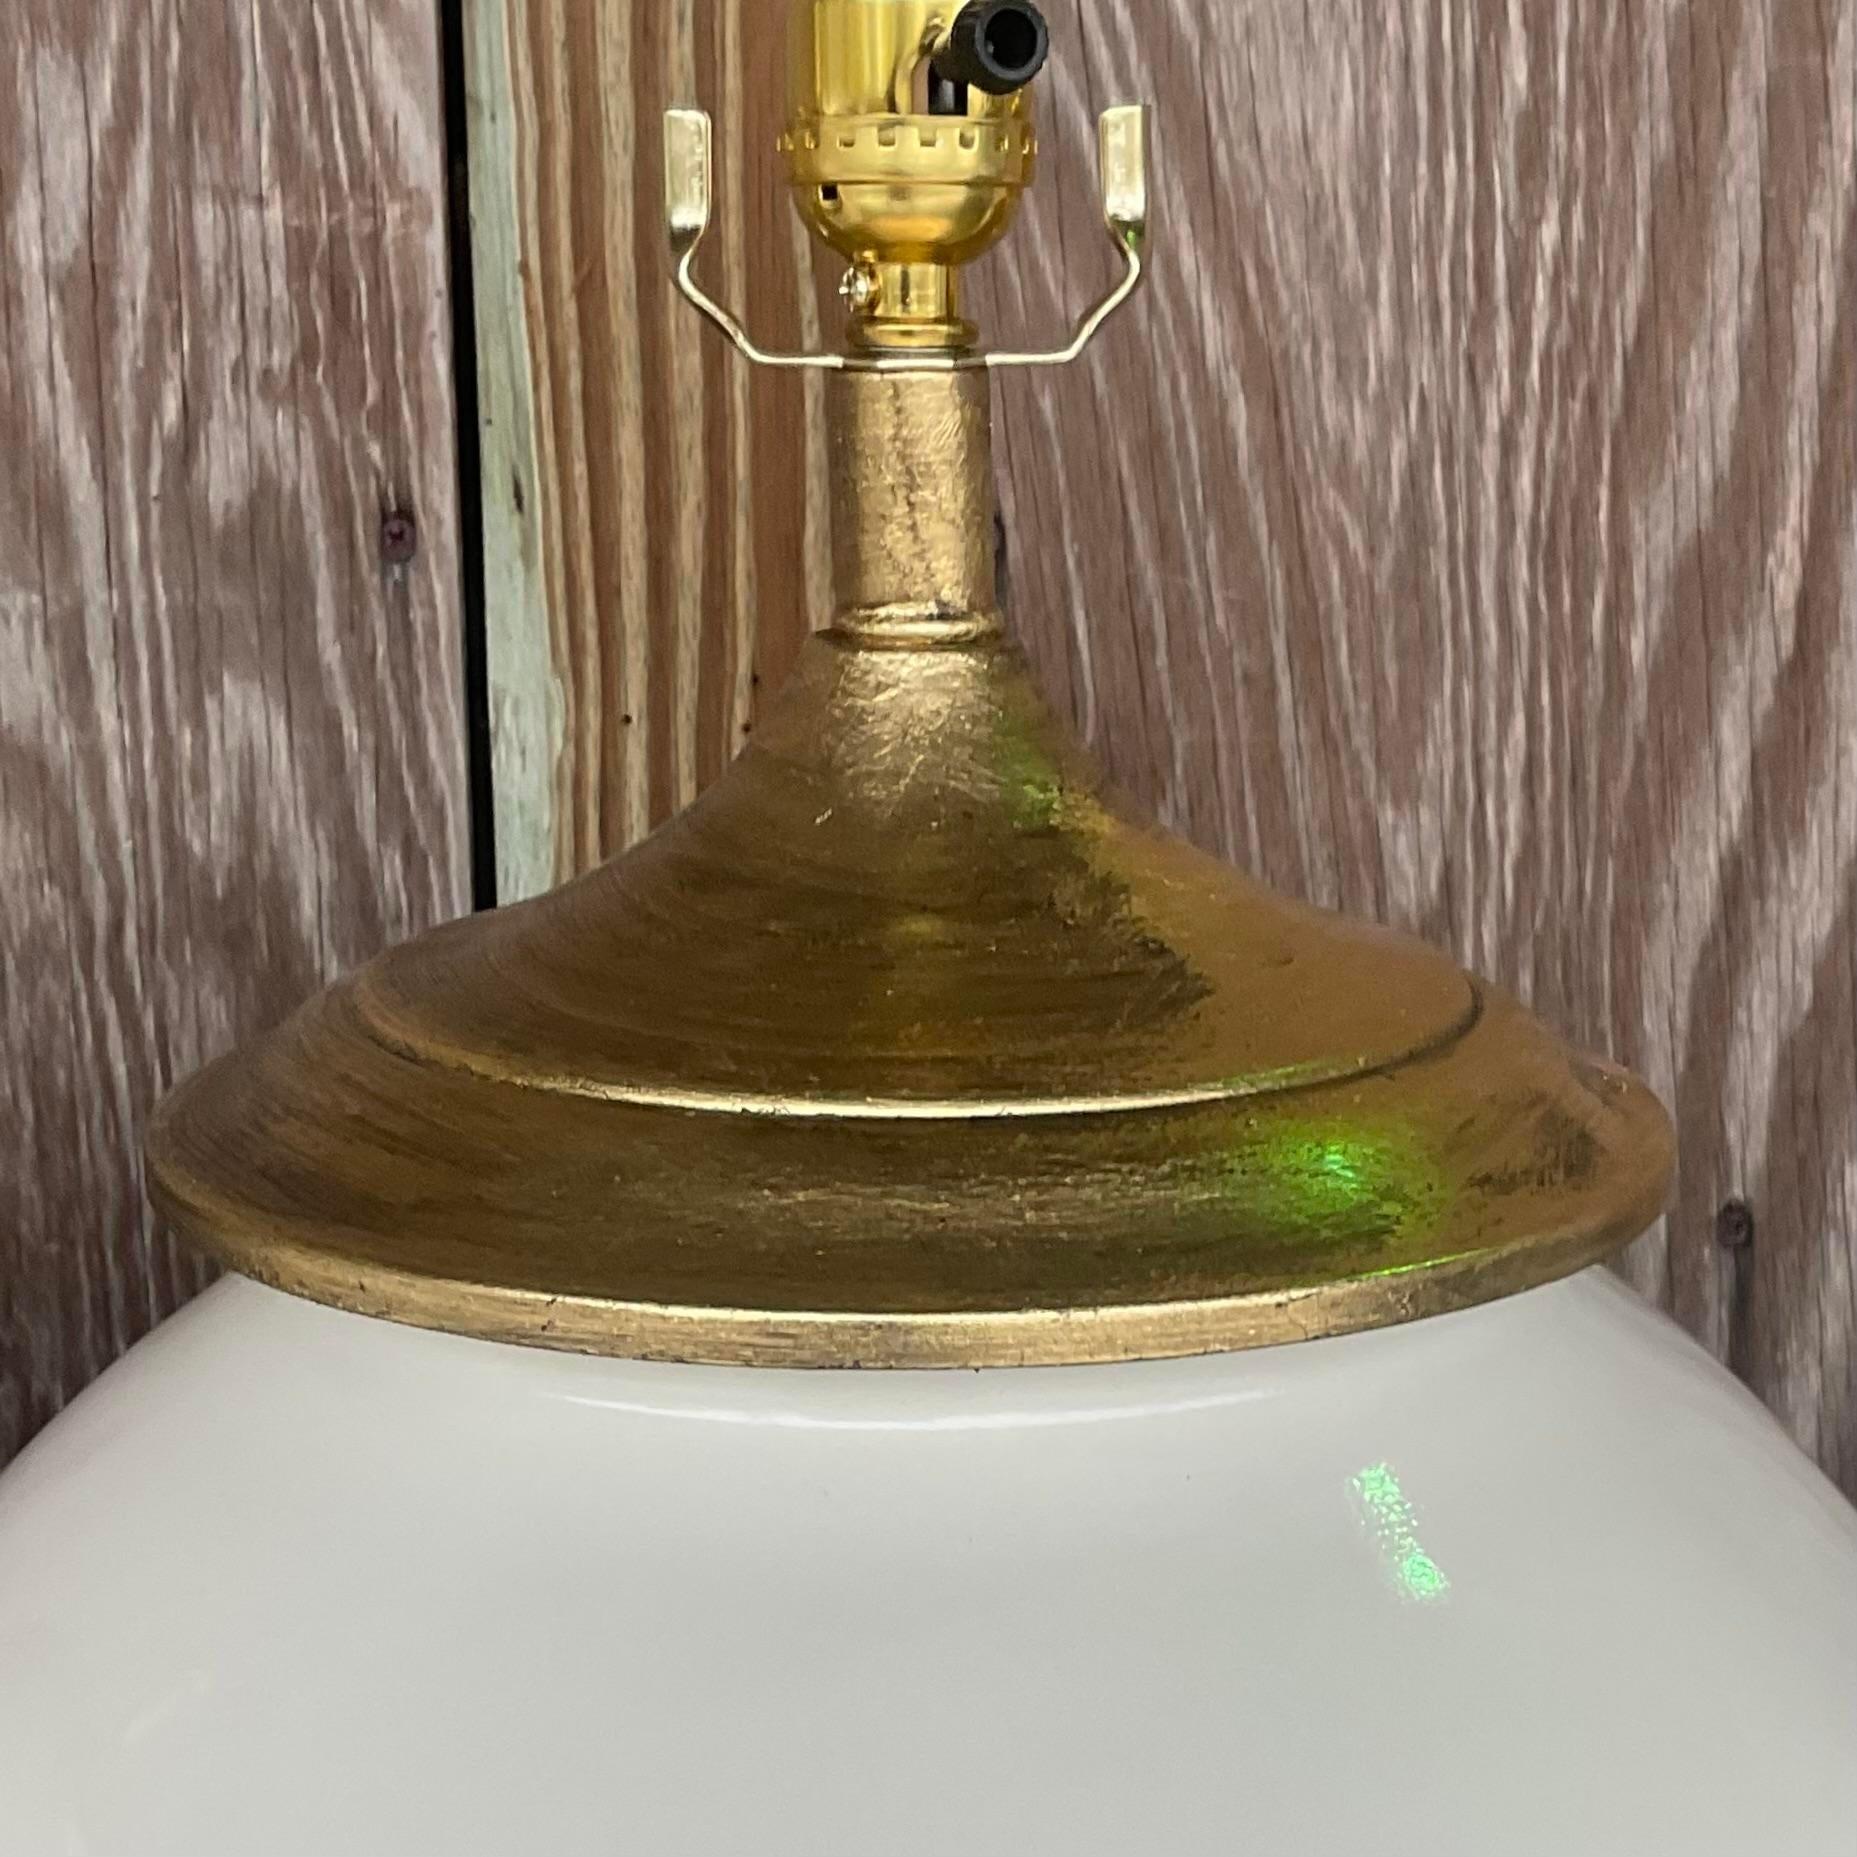 A fabulous pair of vintage table lamps. Made by the iconic Alsy group and tagged on the plinth. Beautiful matte glazed ceramic with gilt plinth and cap. Fully restored with all new wiring and hardware. Acquired from a Palm Beach estate.